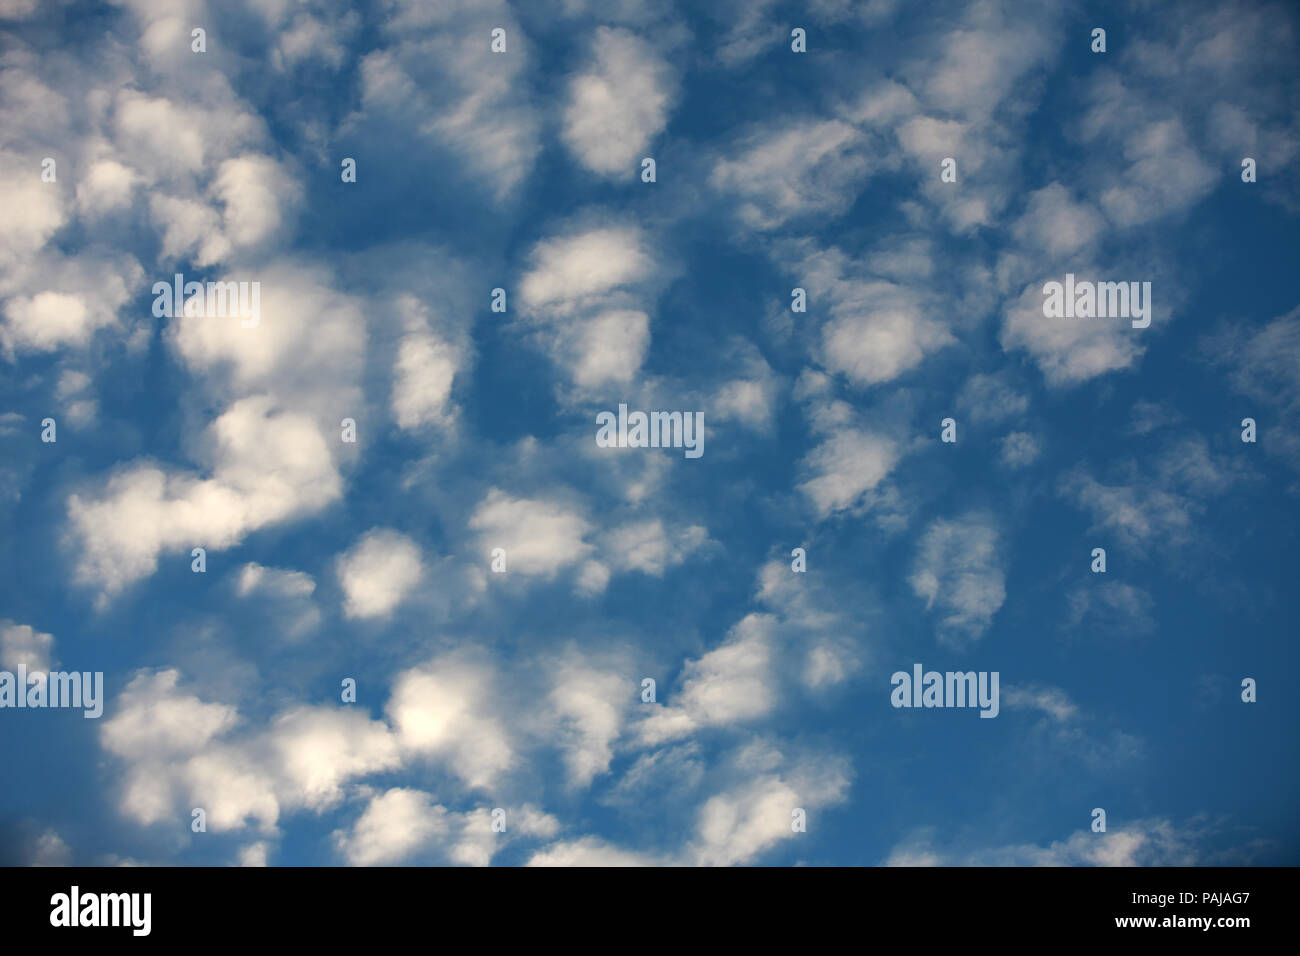 White Fair-weather clouds on a blue sky Stock Photo